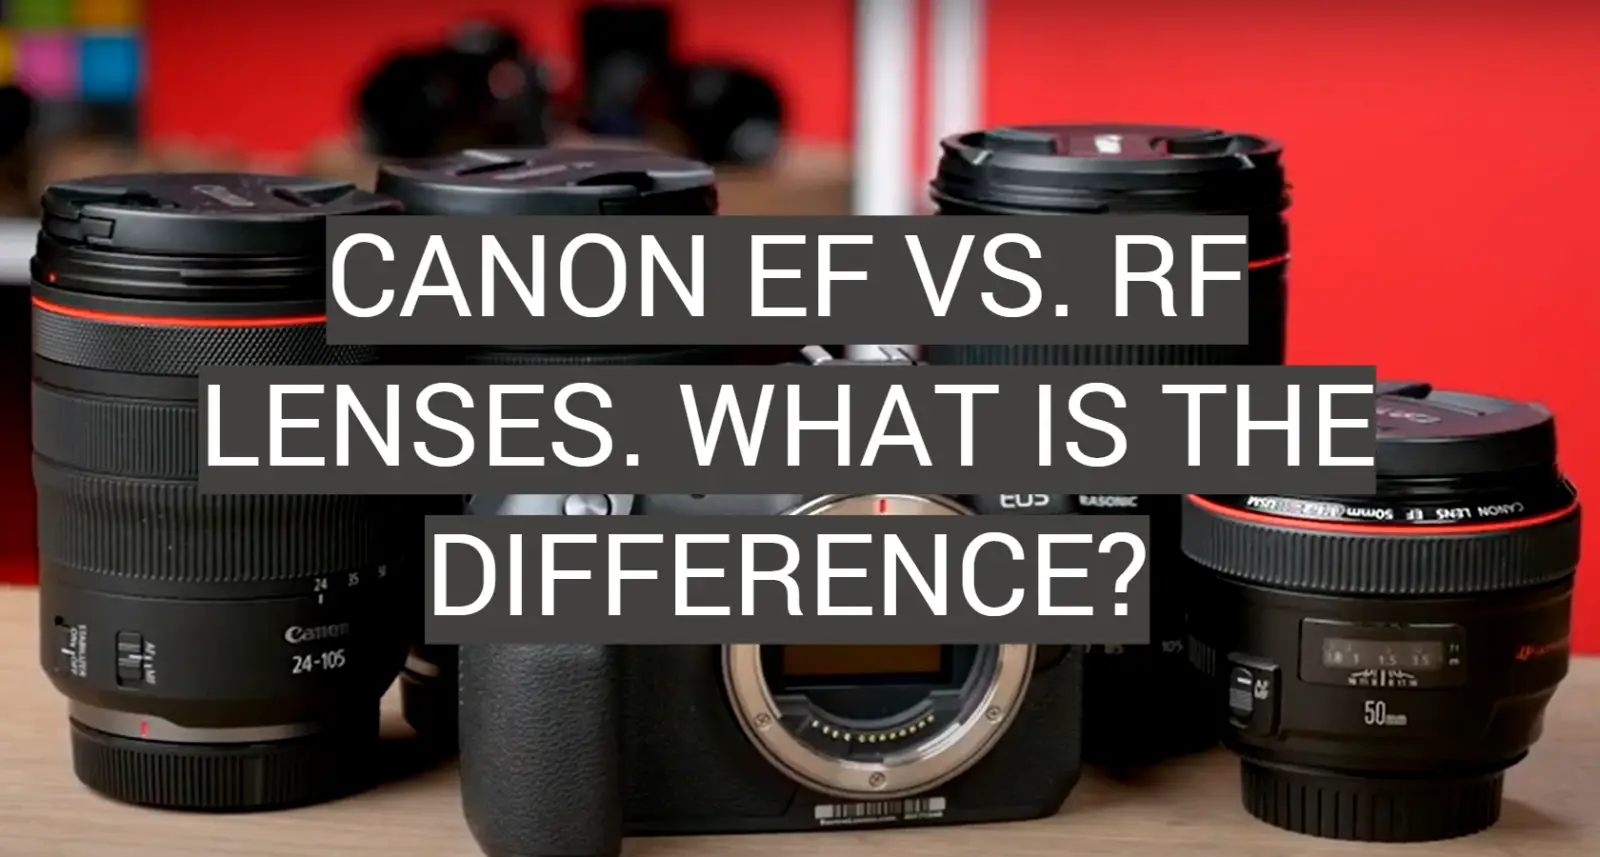 Canon EF vs. RF Lenses. What is the Difference?